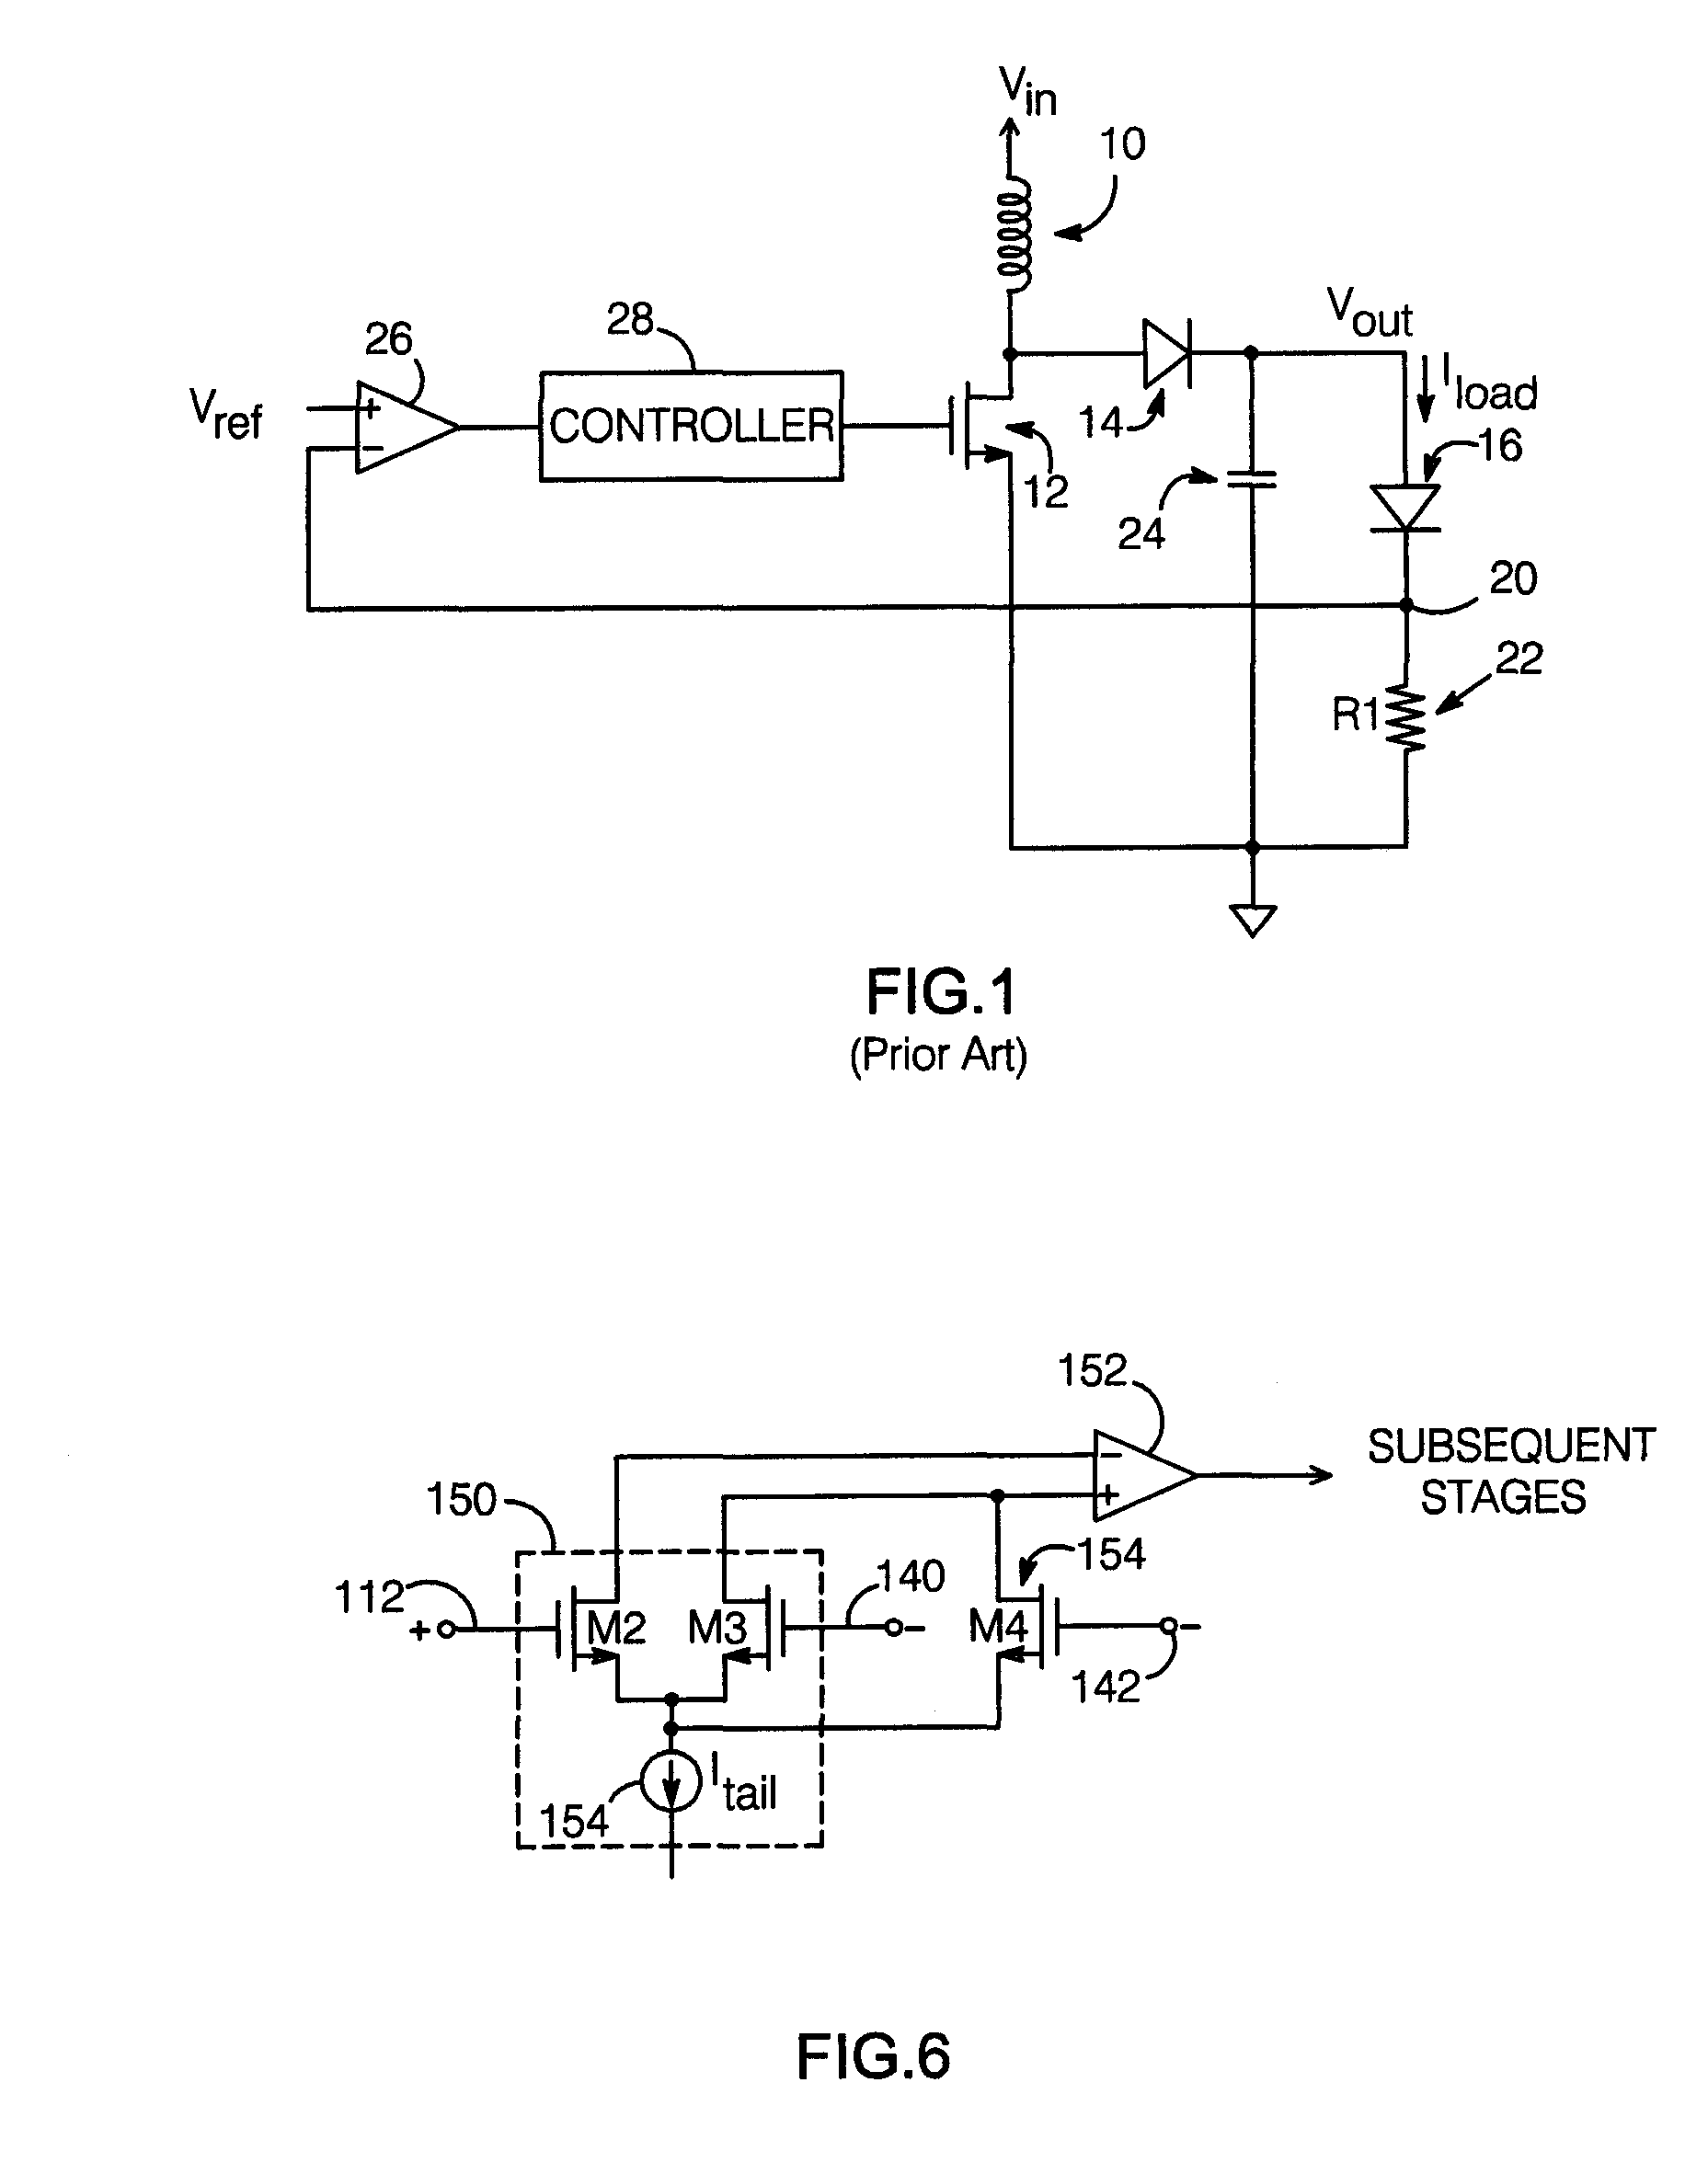 Switching power converter with controlled startup mechanism